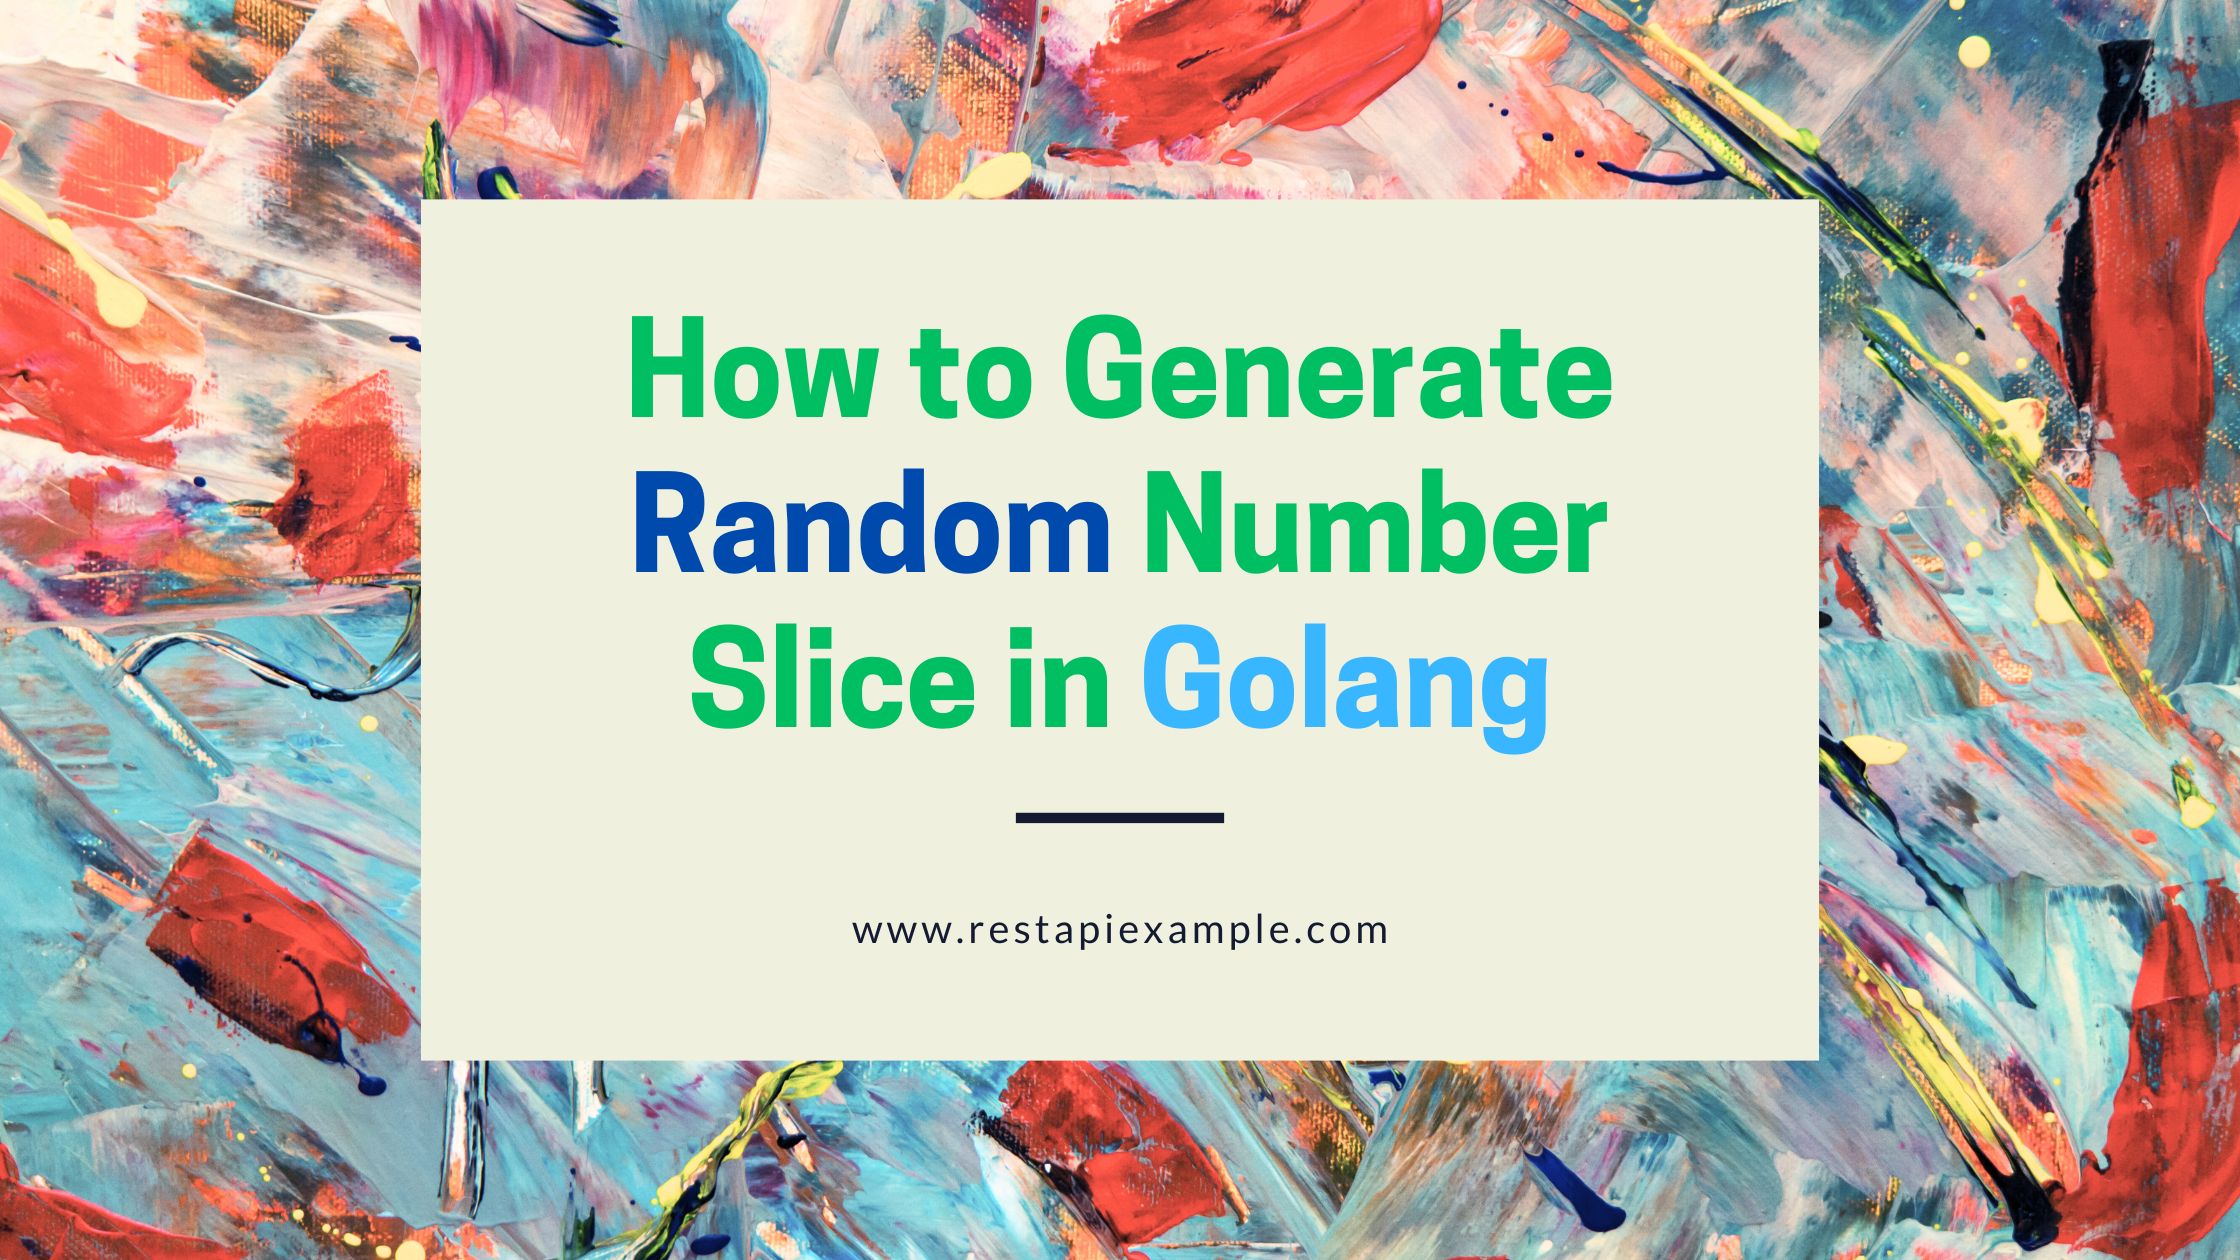 How to Generate Random Number Slice in Golang